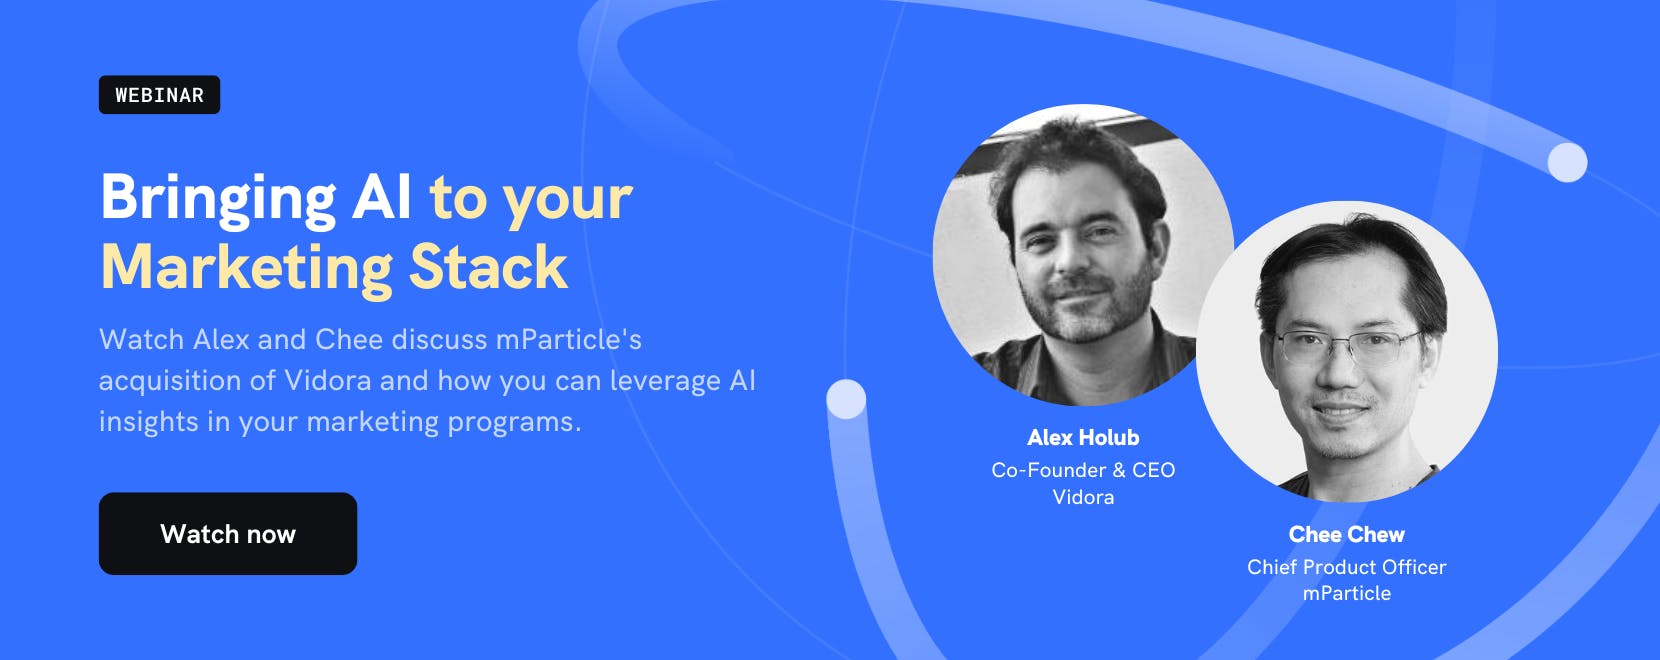 bringing-ai-to-your-marketing-stack